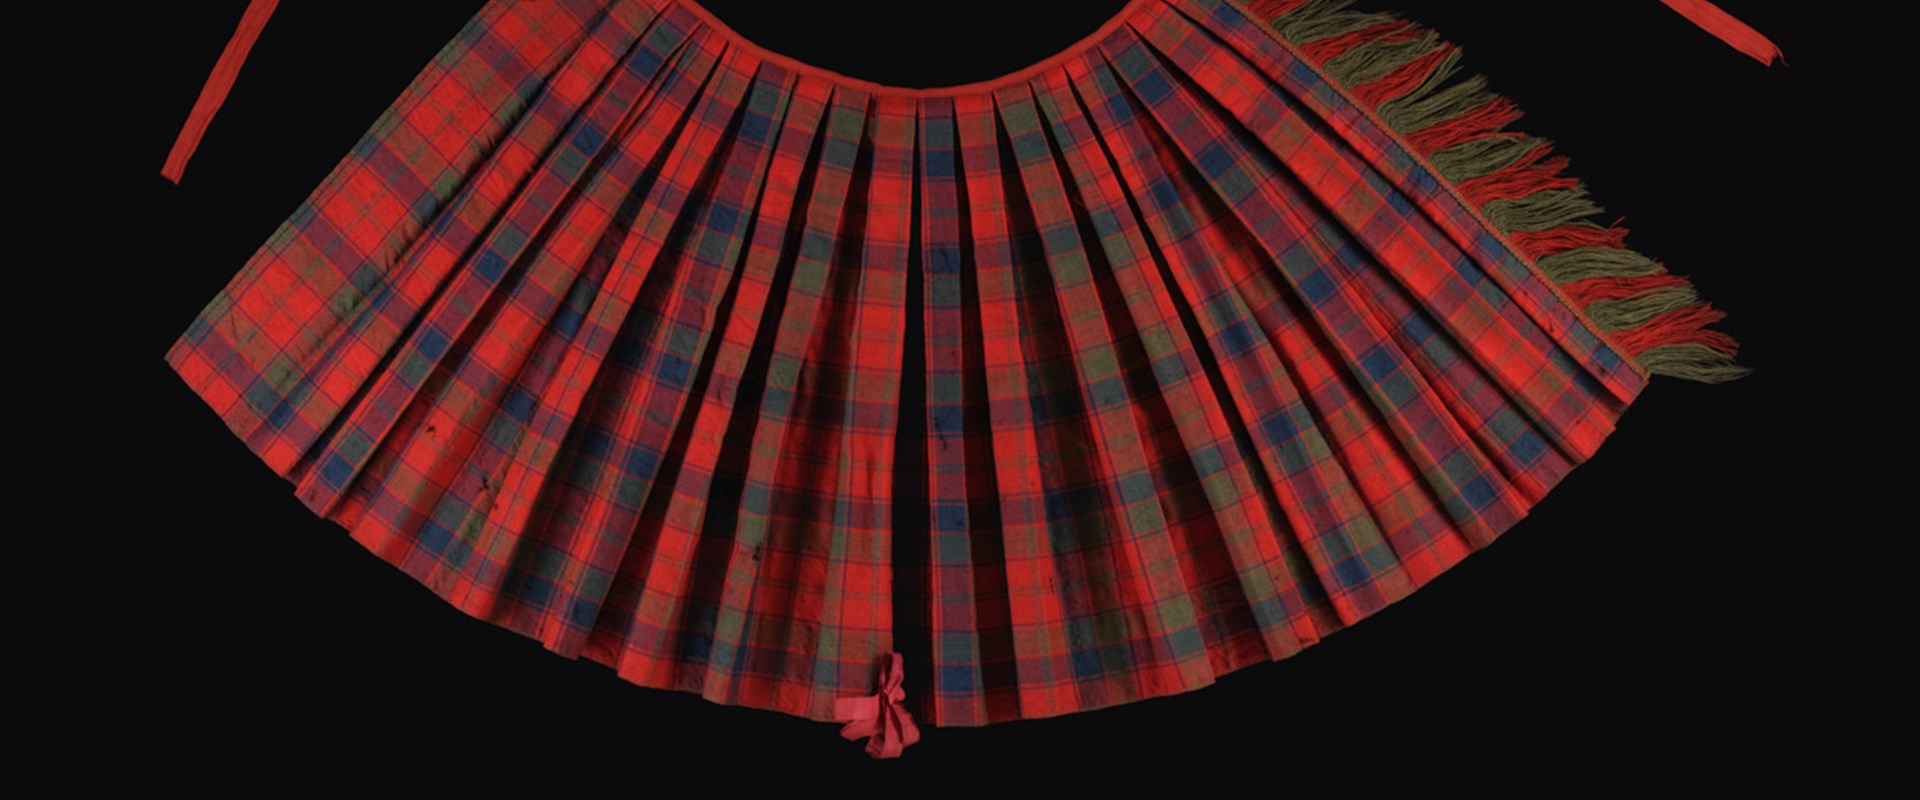 Pleated arc of red and green checkered tartan with strands at both top corners against a black background.